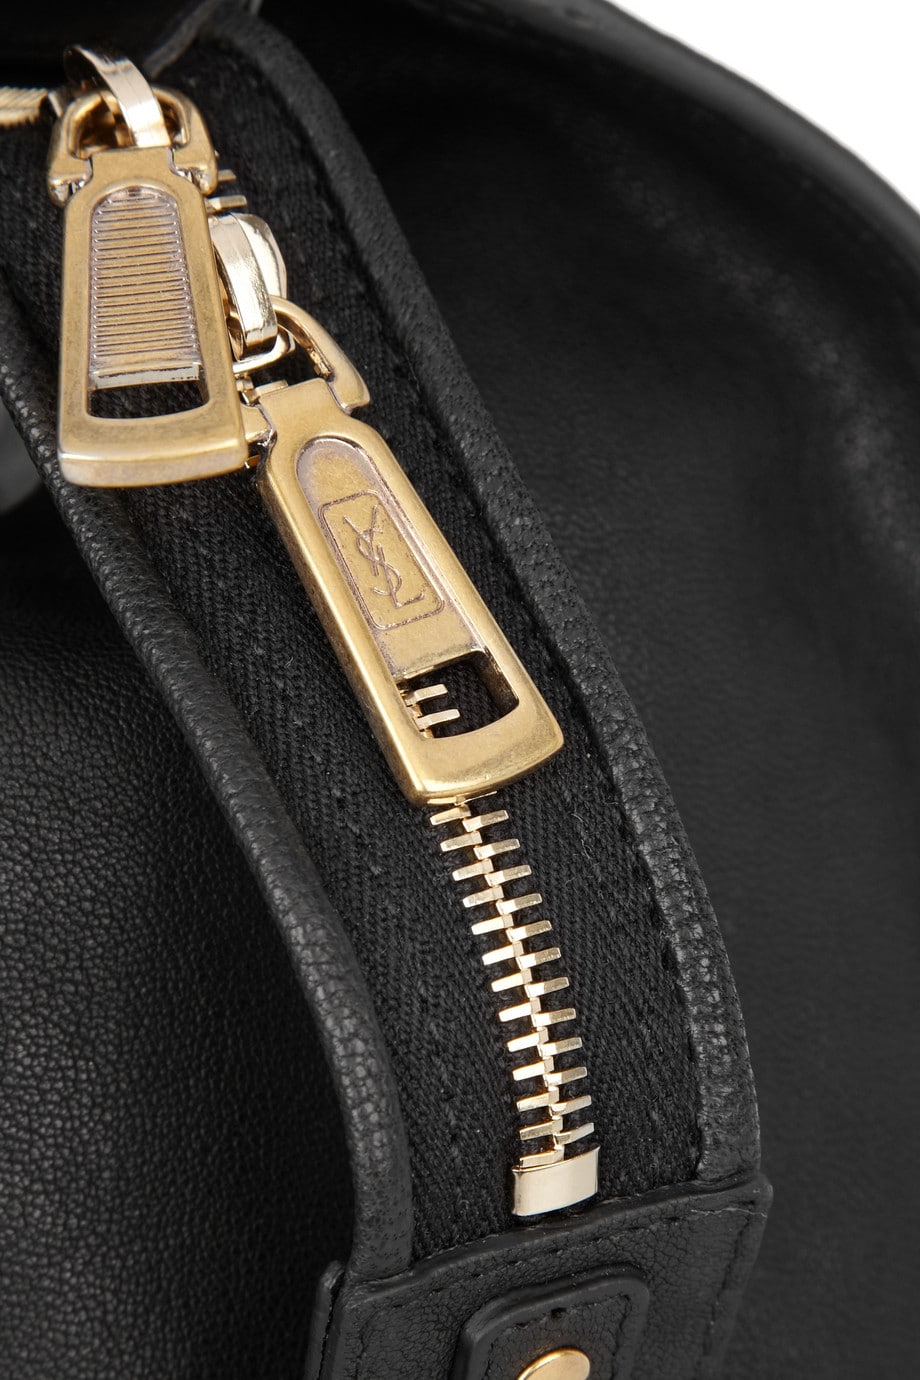 Saint Laurent Cabas Bag redesigned from the former Chyc Cabas ...